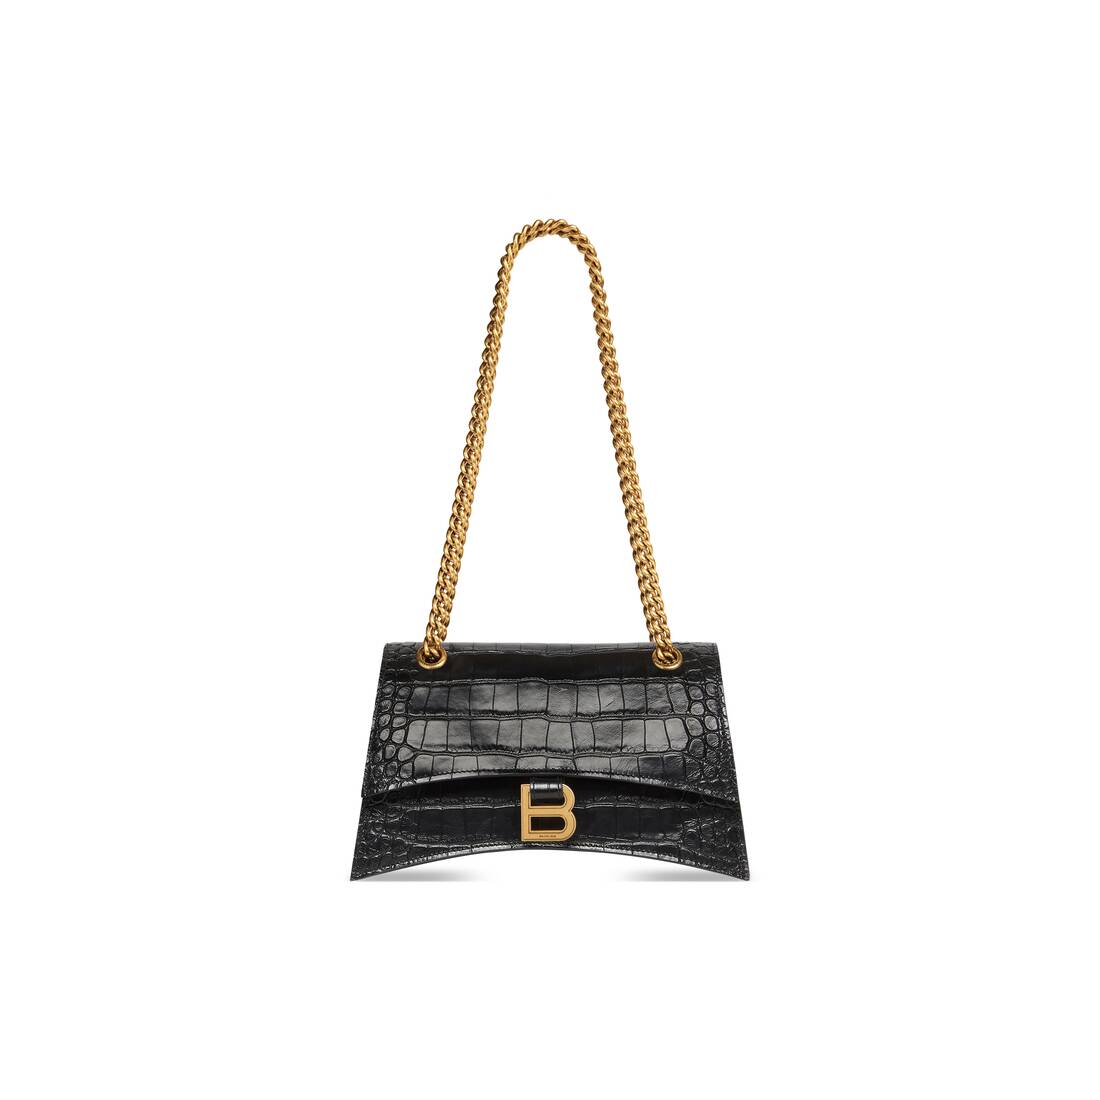 10 CHEAP Balenciaga Bag Dupes From The Low Price Of $20!